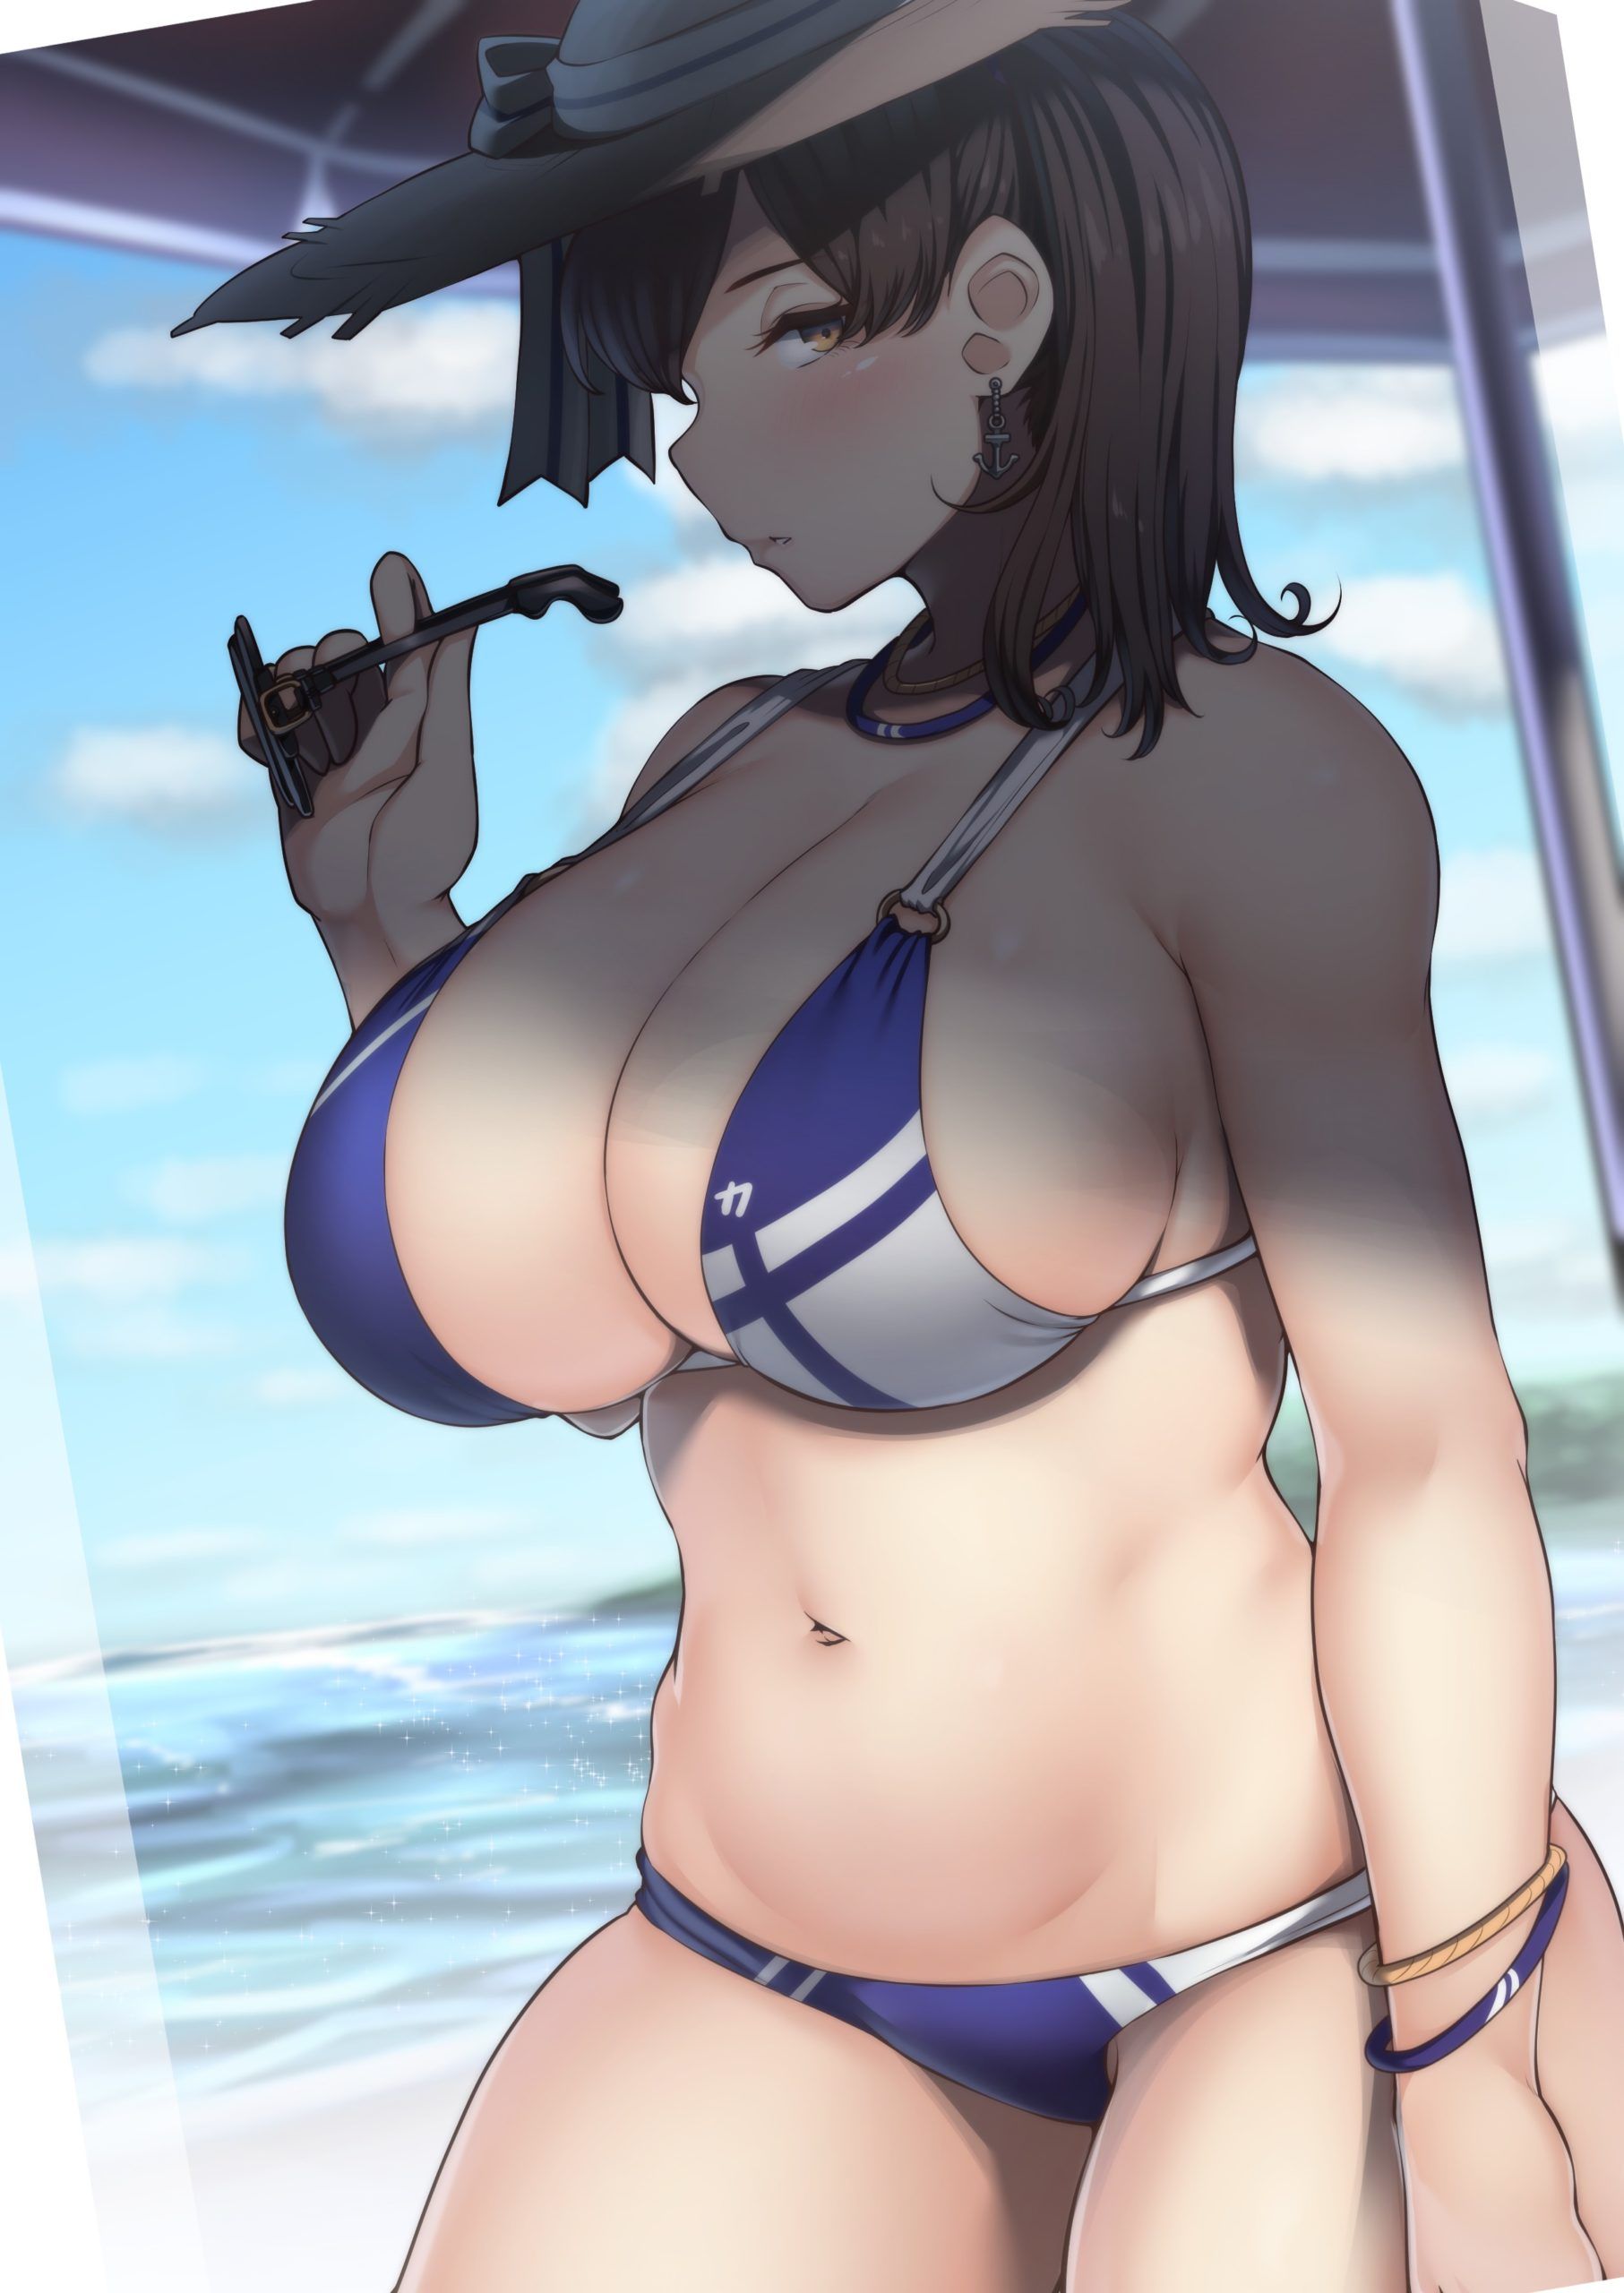 Two-dimensional erotic image w packed with various things anyway, such as Kaga's full body and of the ship this 19